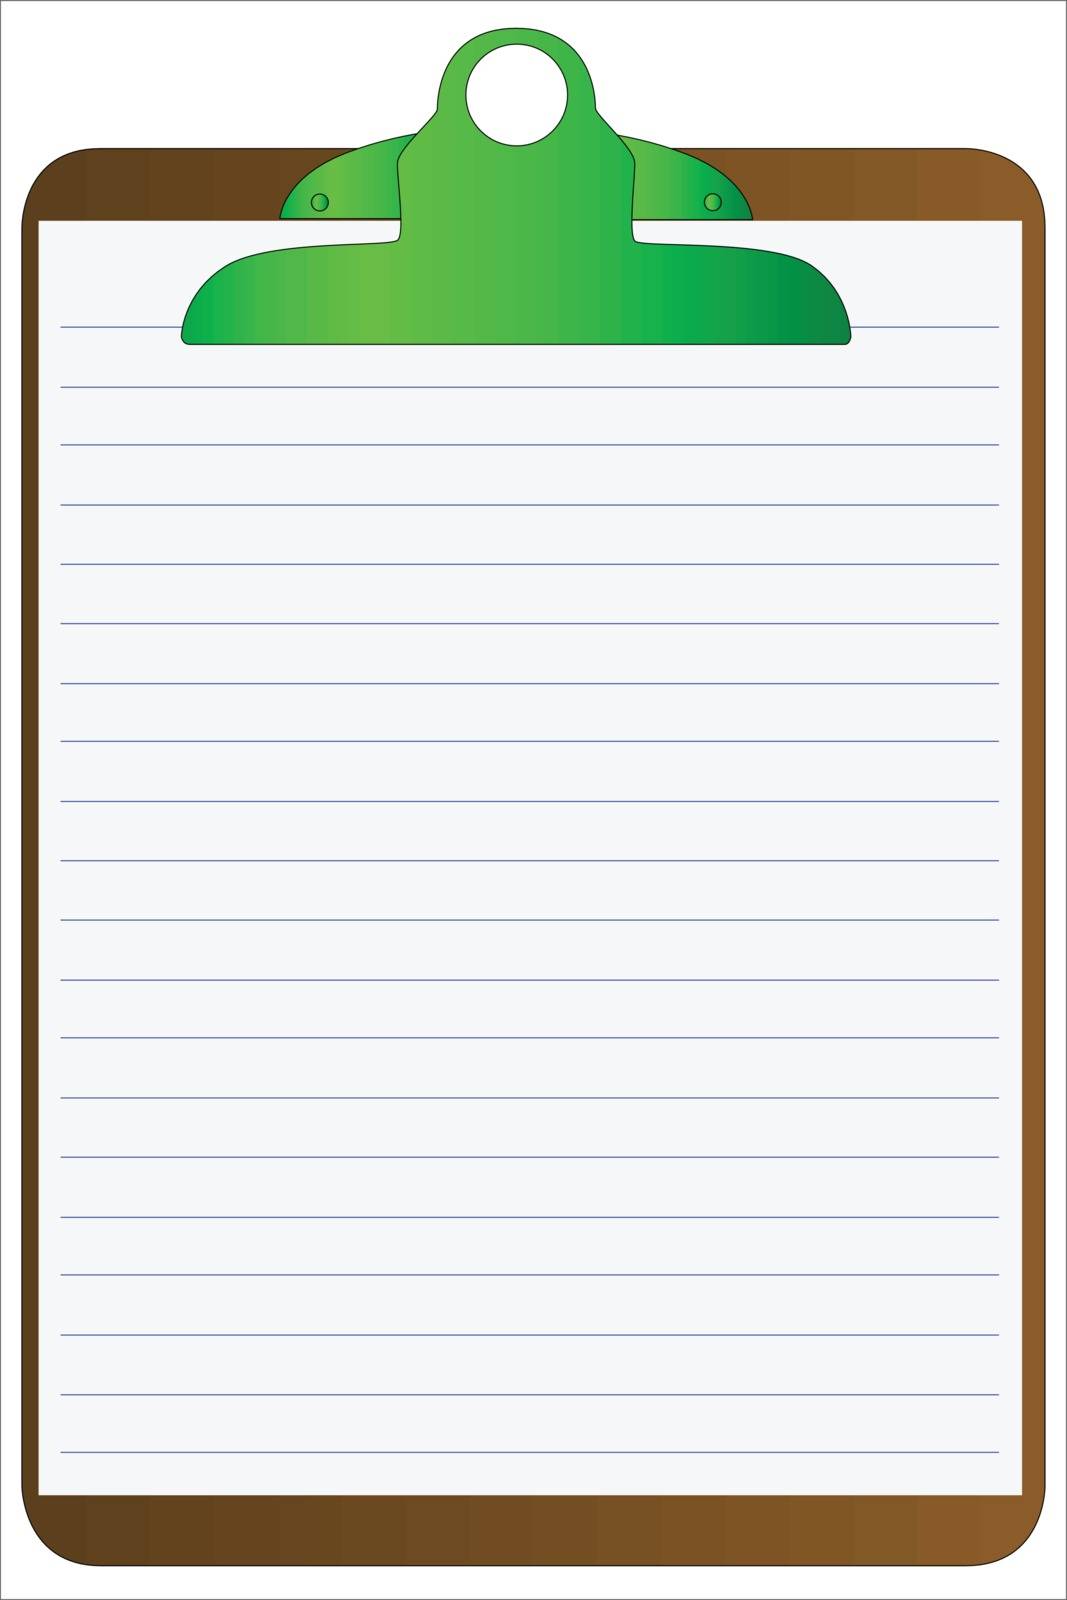 A clipboard with a lined paper over a white background